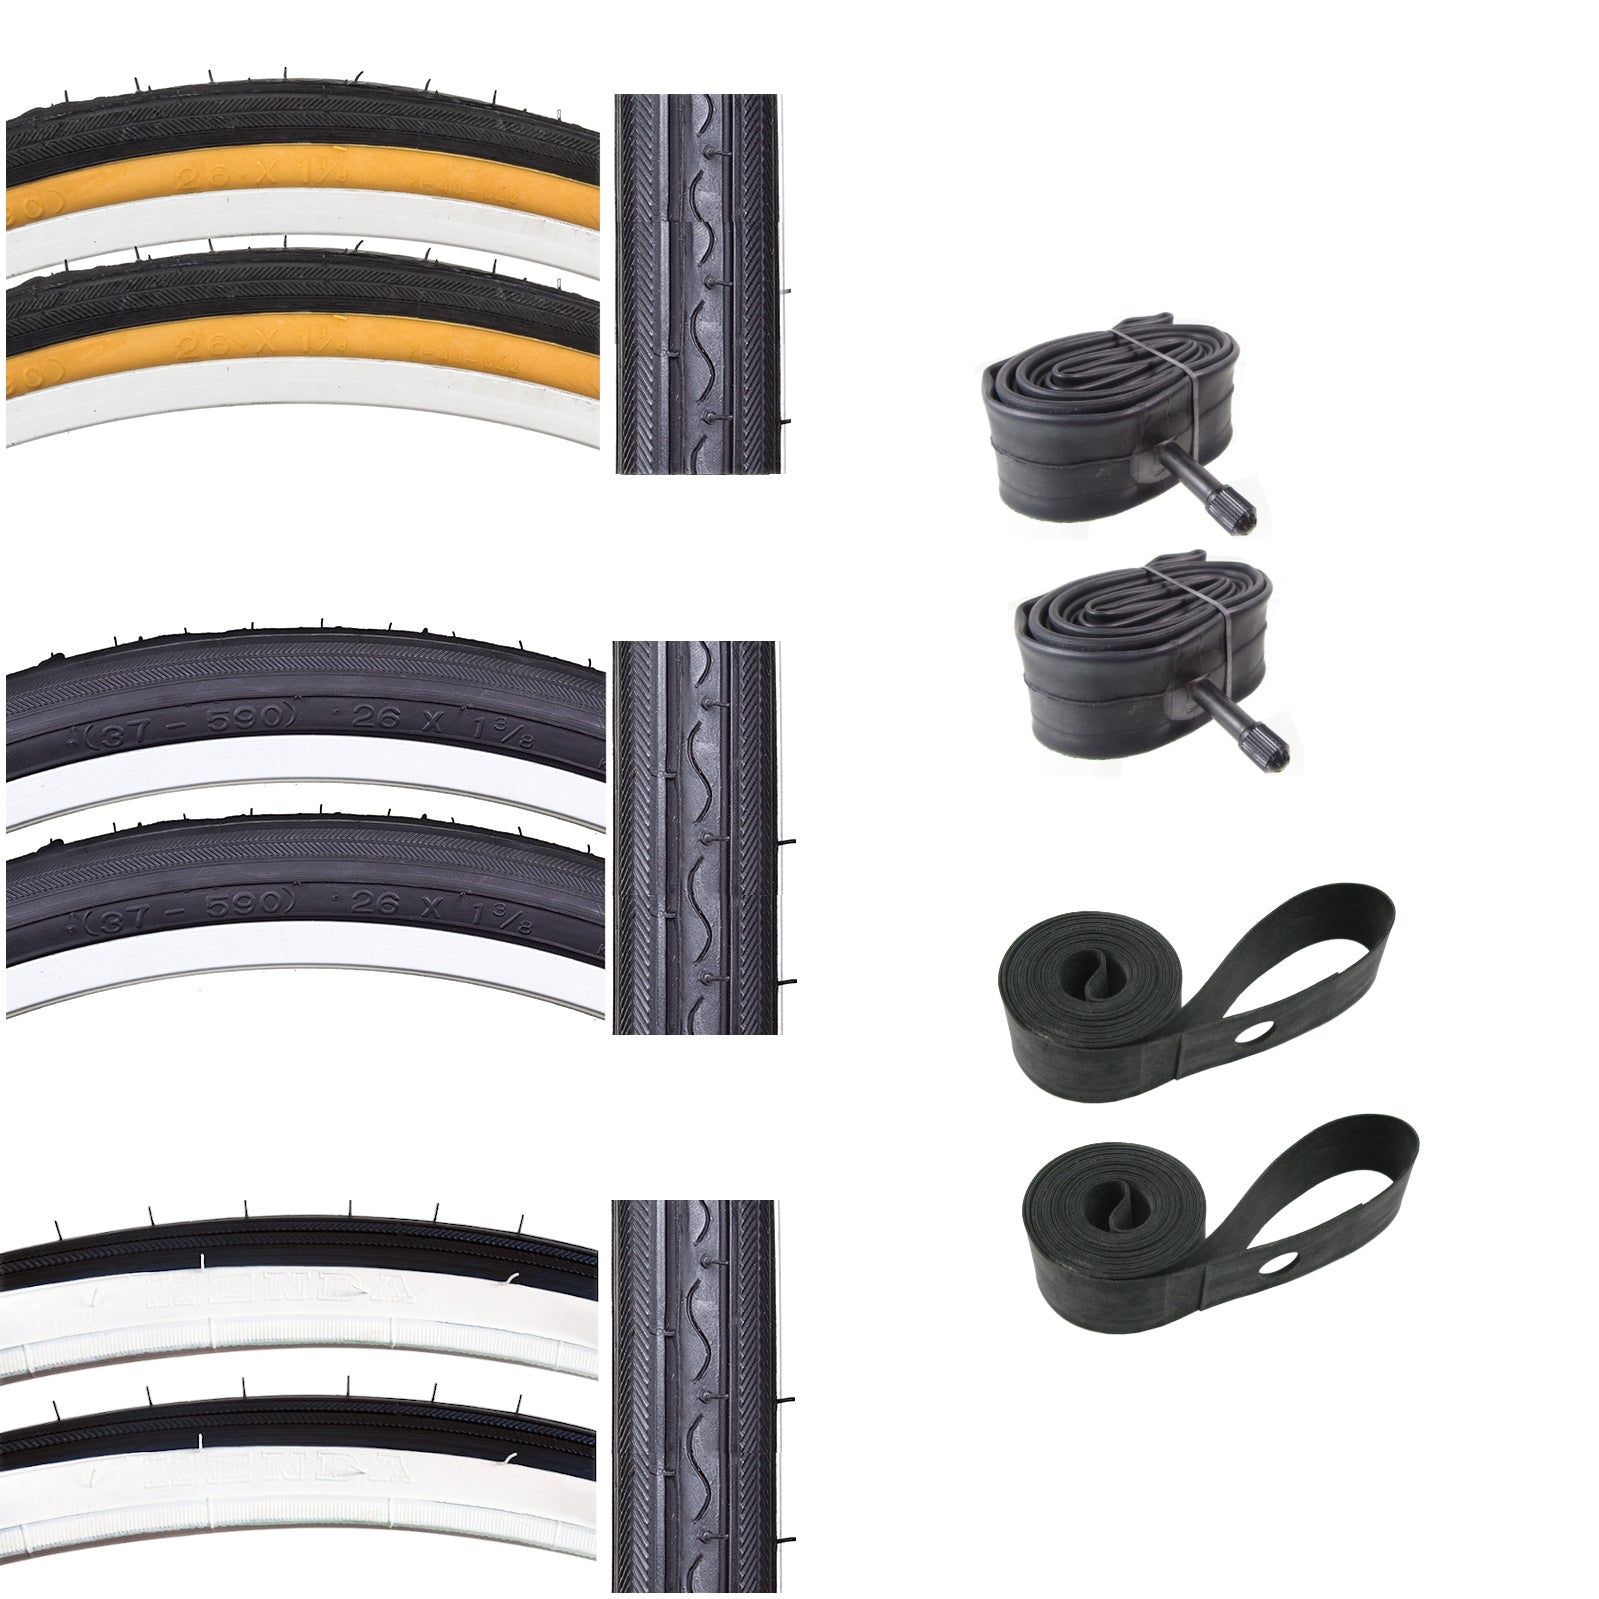 Kenda K40 26x1-3/8 skinwall or blackwall or whitewall tires with Schrader valve tube and rubber rim strip.